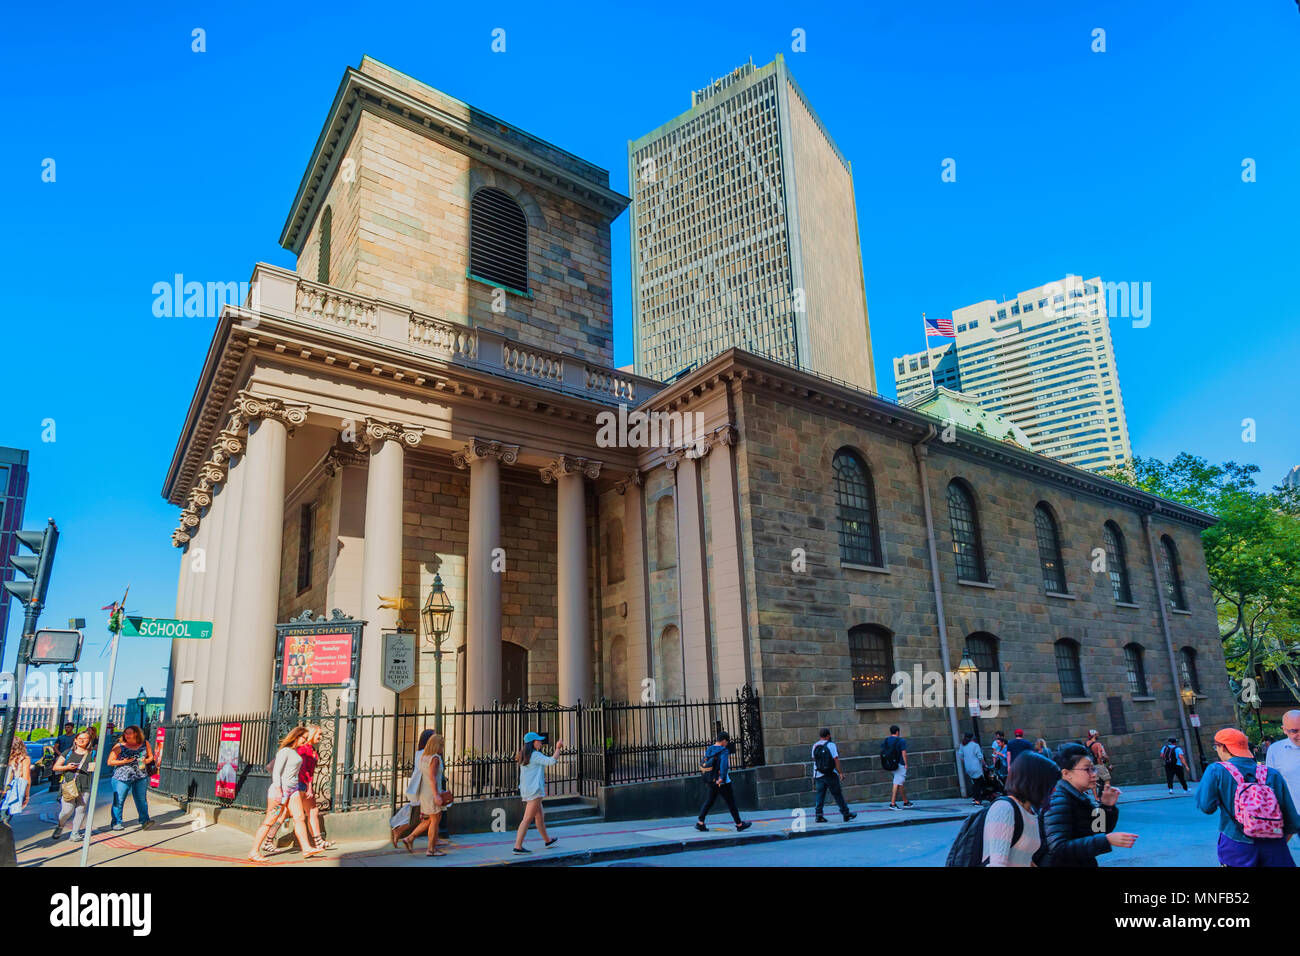 Boston, Massachusetts, USA - September 12, 2016:King's Chapel on the corner of Tremont and School streets of the Freedom Trail Stock Photo